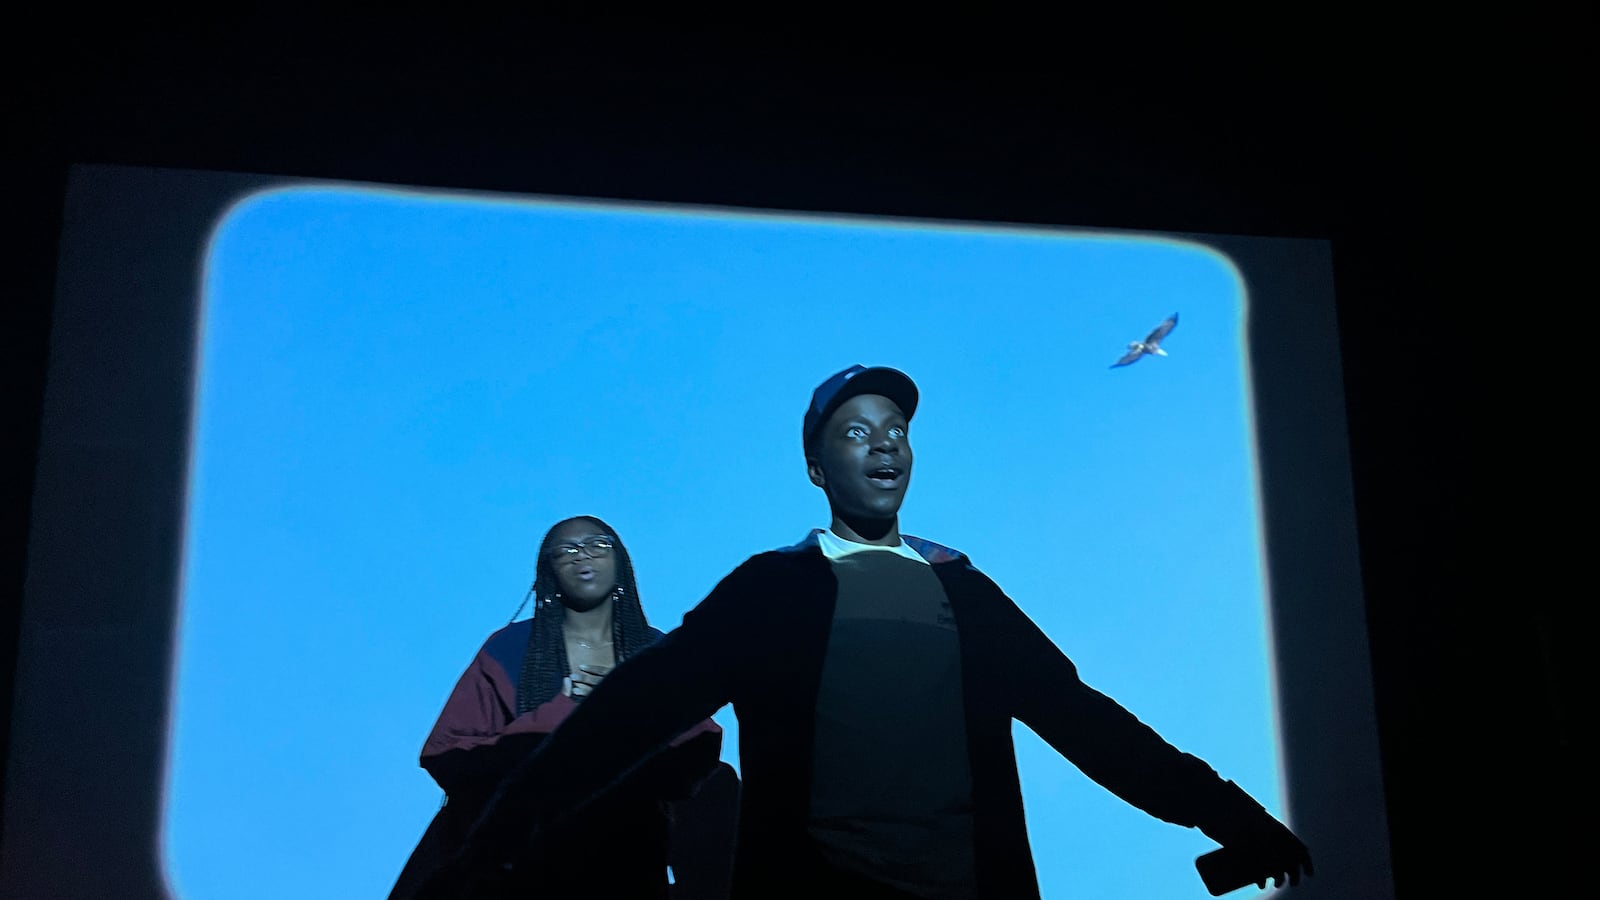 Two high school students stand in the middle of a blue square with a projection of a bird flying above them. 